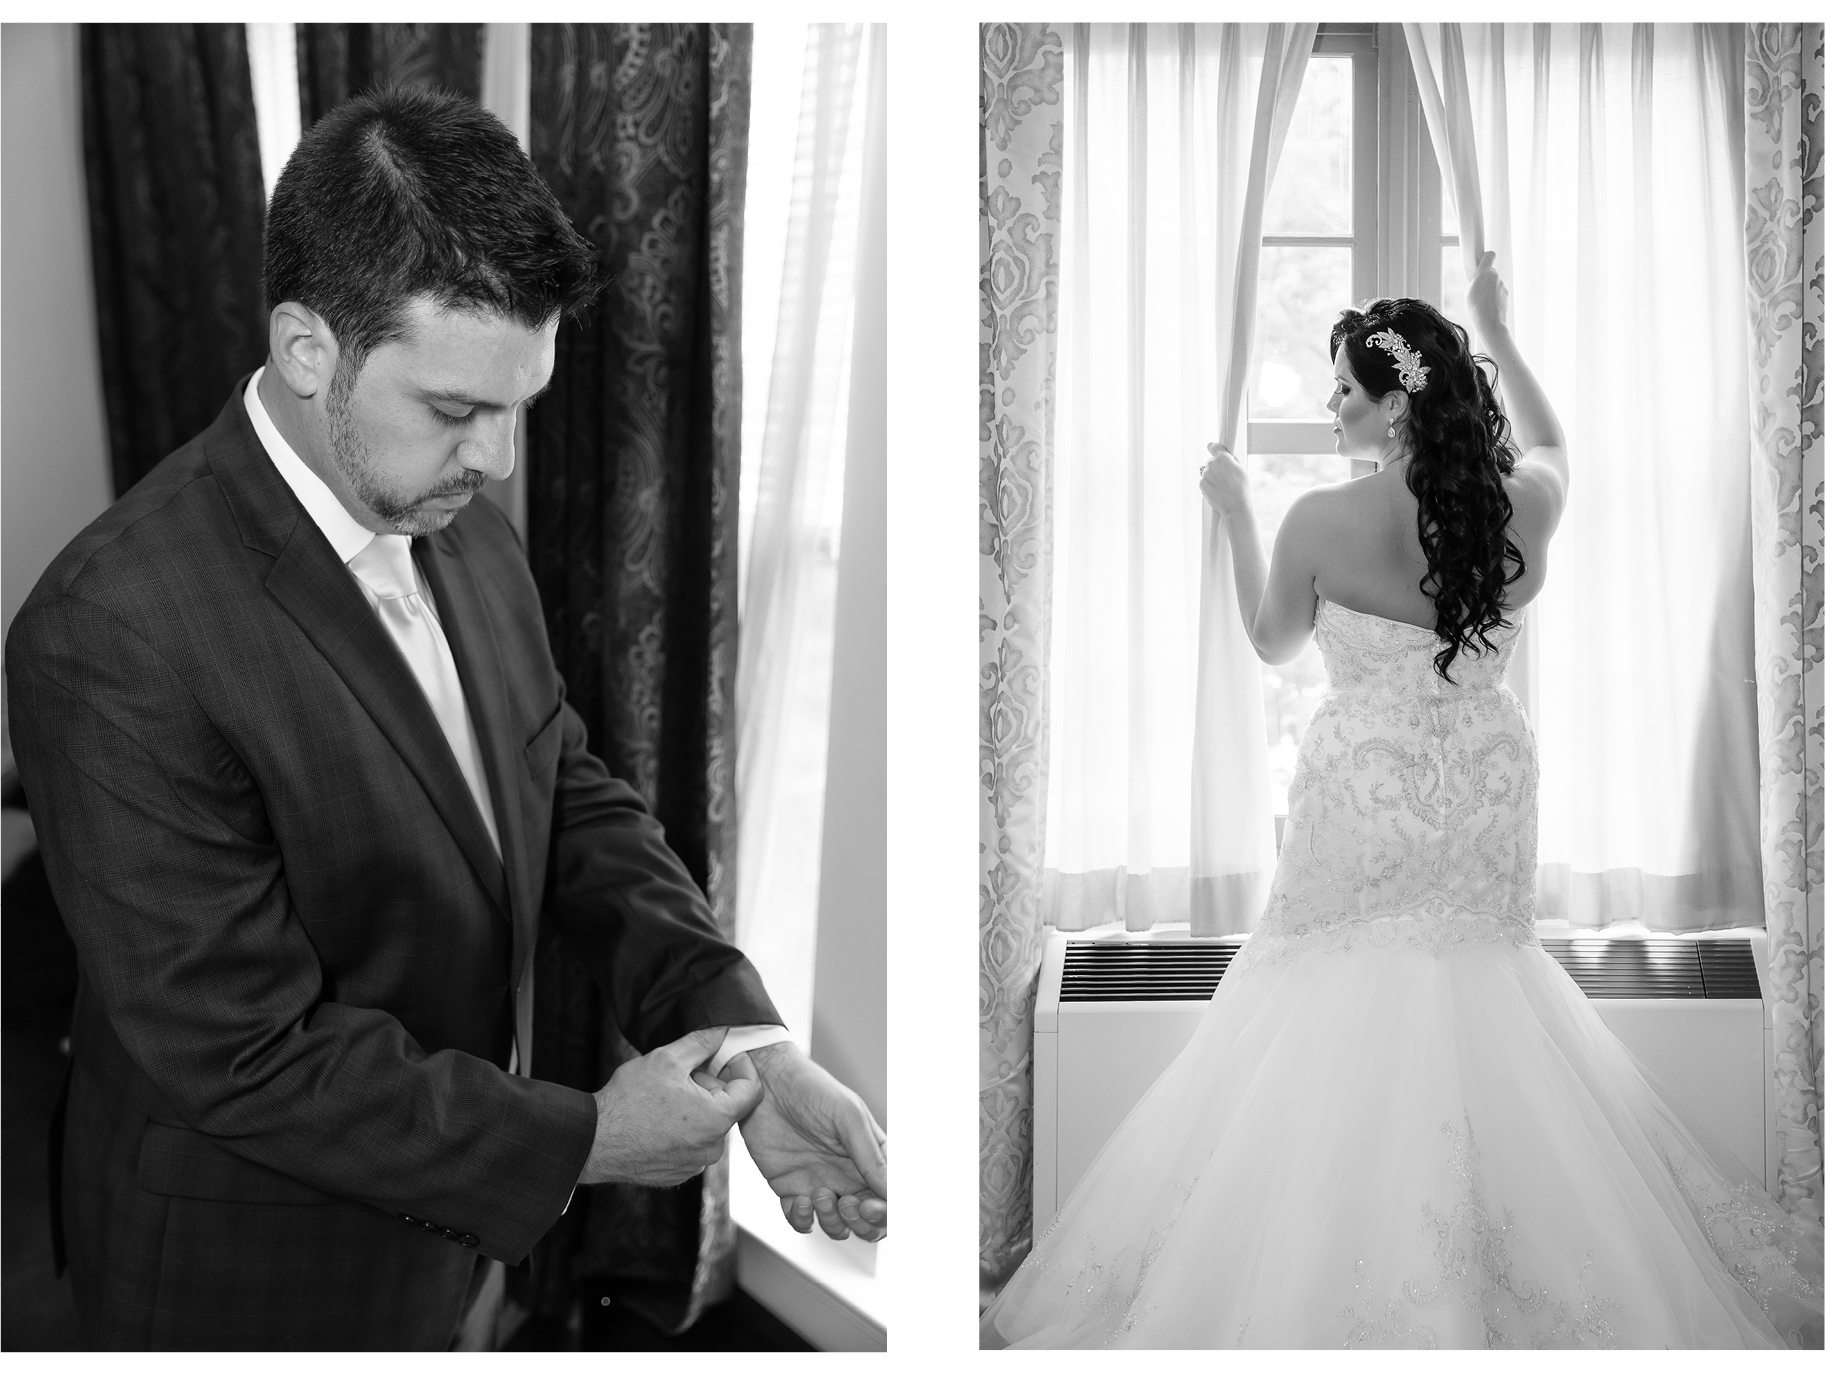 Jon and Victoria’s Wedding :: Blue Bell Country Club, PA – Michelle Lala Clark ...1825 x 1375